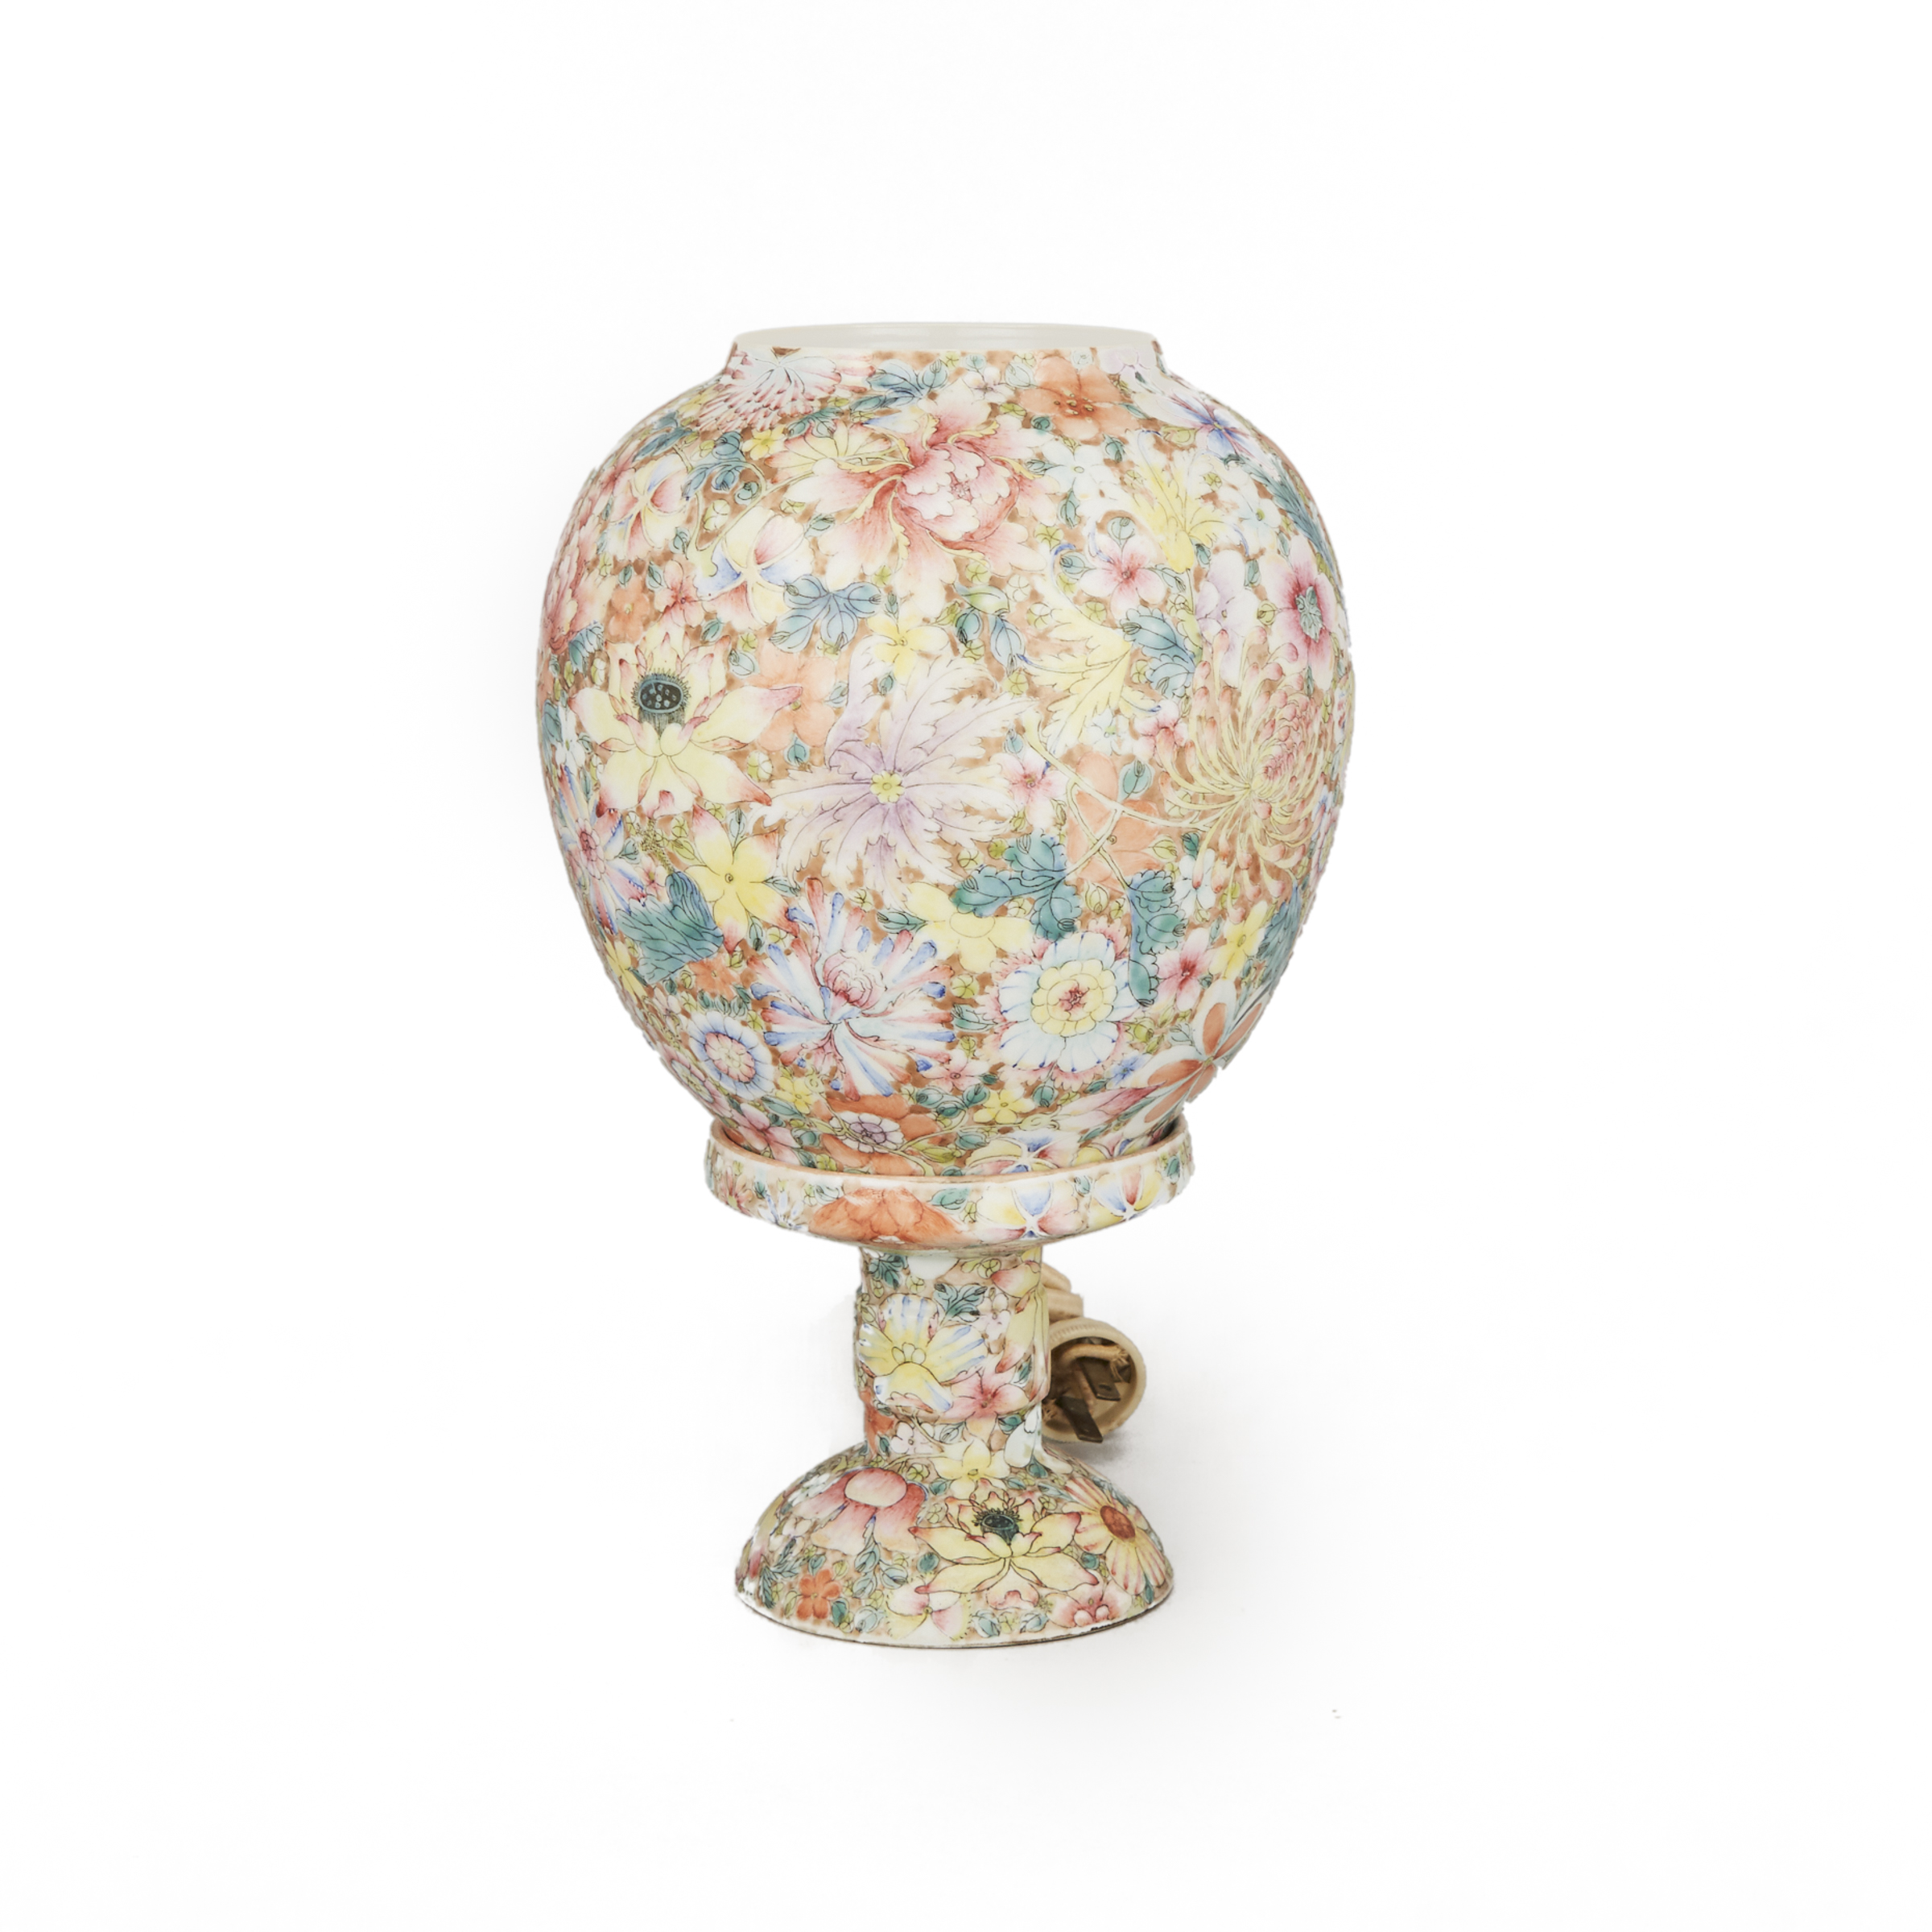 A Chinese Eggshell Porcelain 'Millefleur' Lamp, Qing Dynasty 